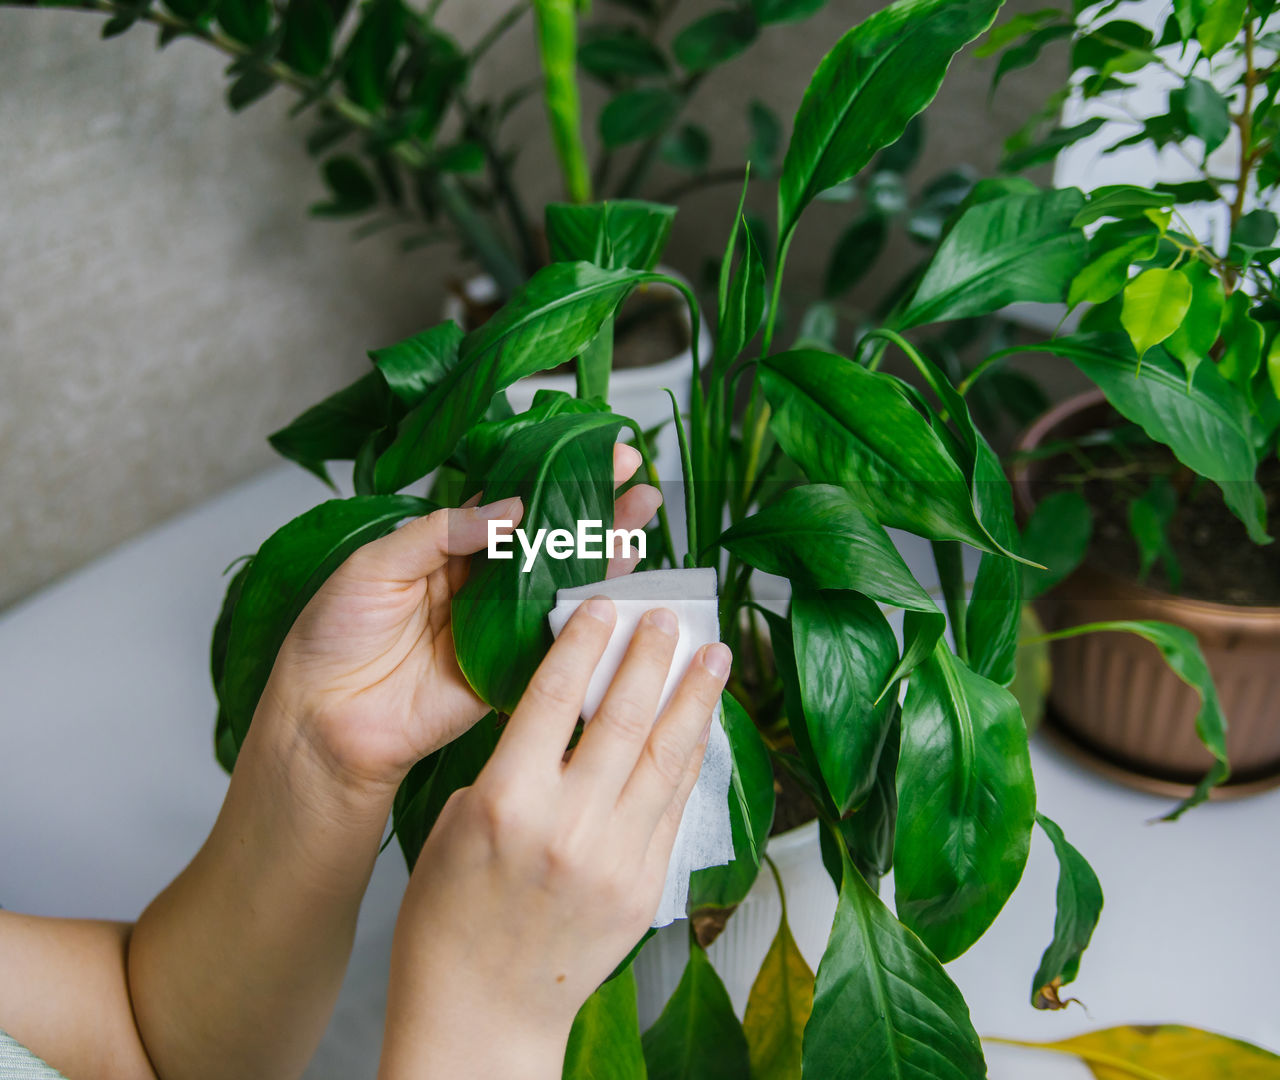 green, leaf, plant part, hand, plant, flower, nature, one person, adult, holding, floristry, growth, lifestyles, women, food, produce, indoors, freshness, herb, food and drink, potted plant, gardening, houseplant, close-up, female, environmental conservation, floral design